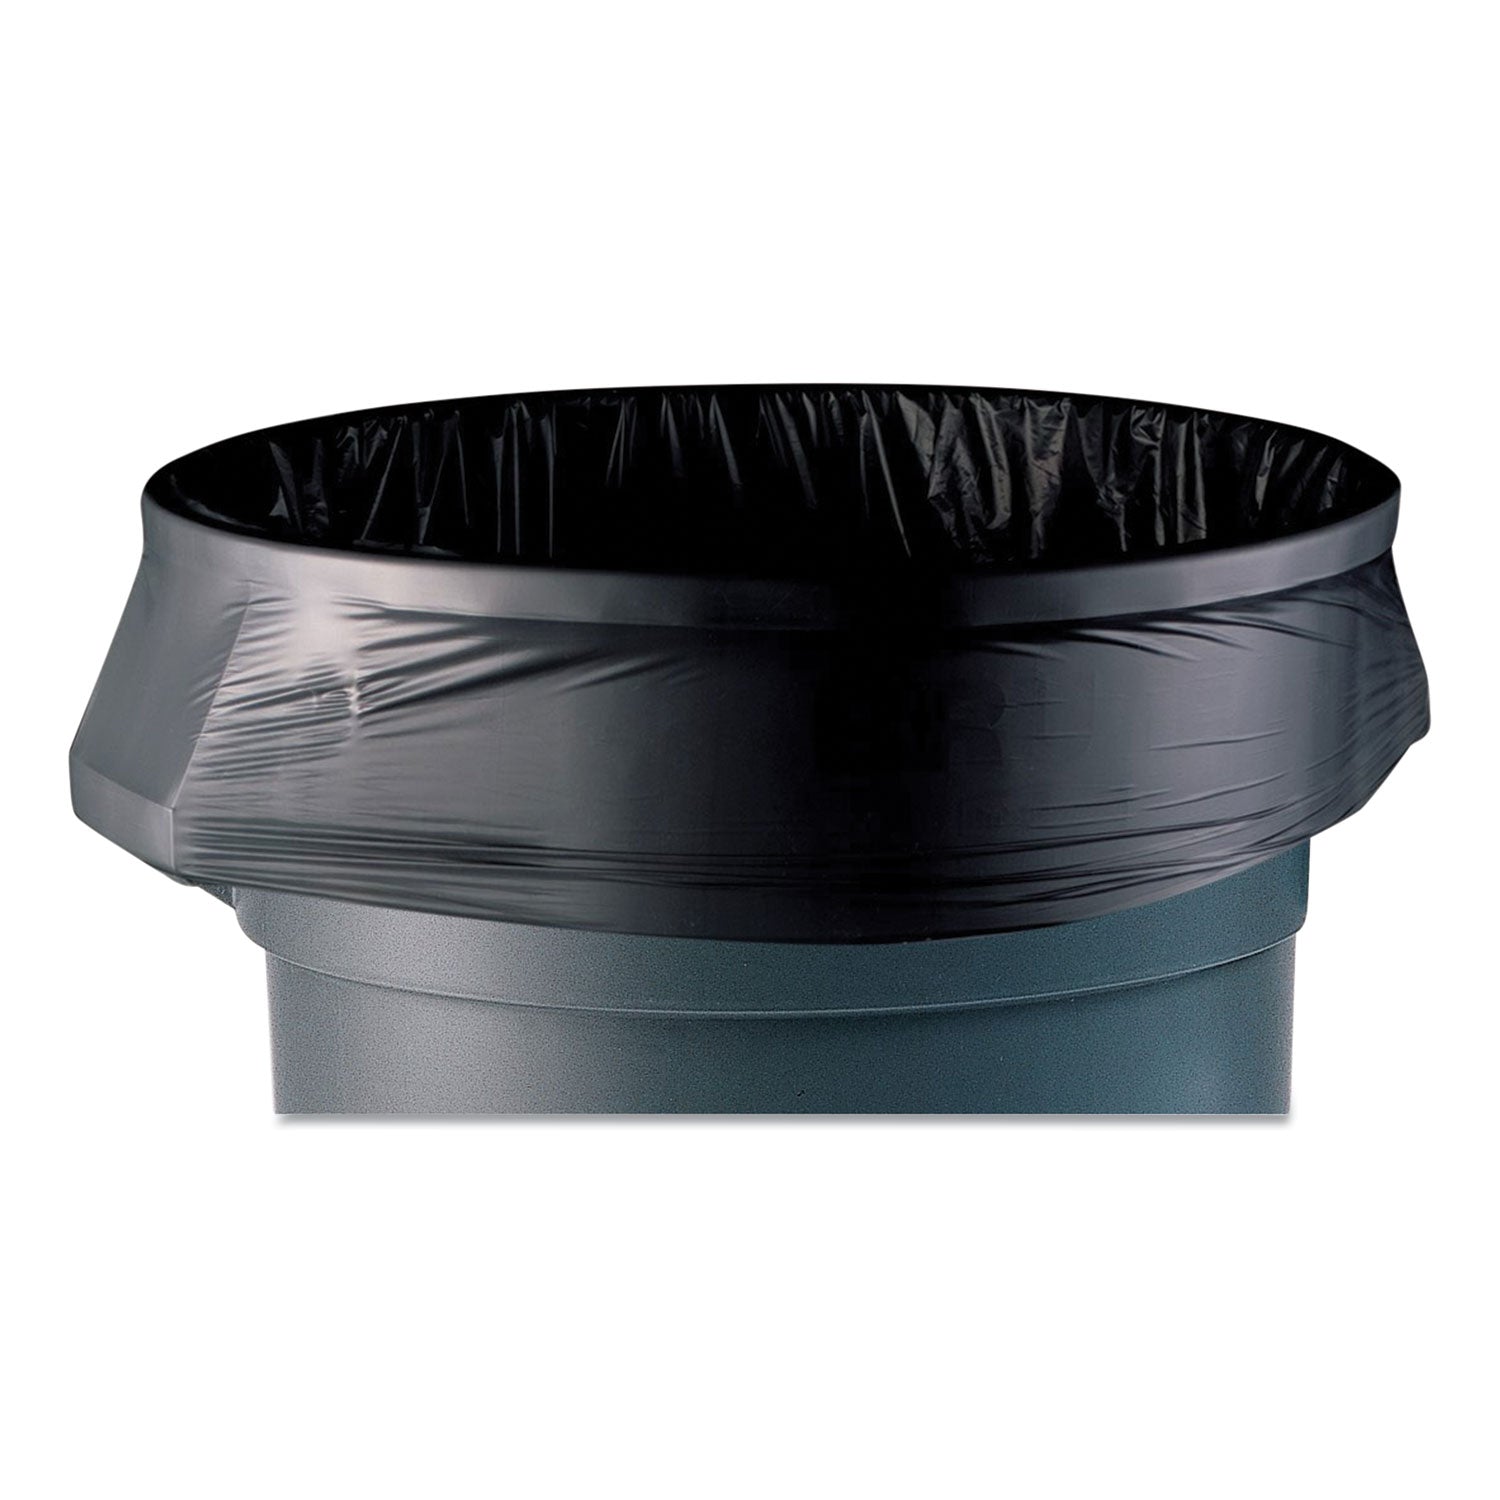 accufit-linear-low-density-can-liners-55-gal-13-mil-40-x-53-black-20-bags-roll-5-rolls-carton_cwz472384 - 1